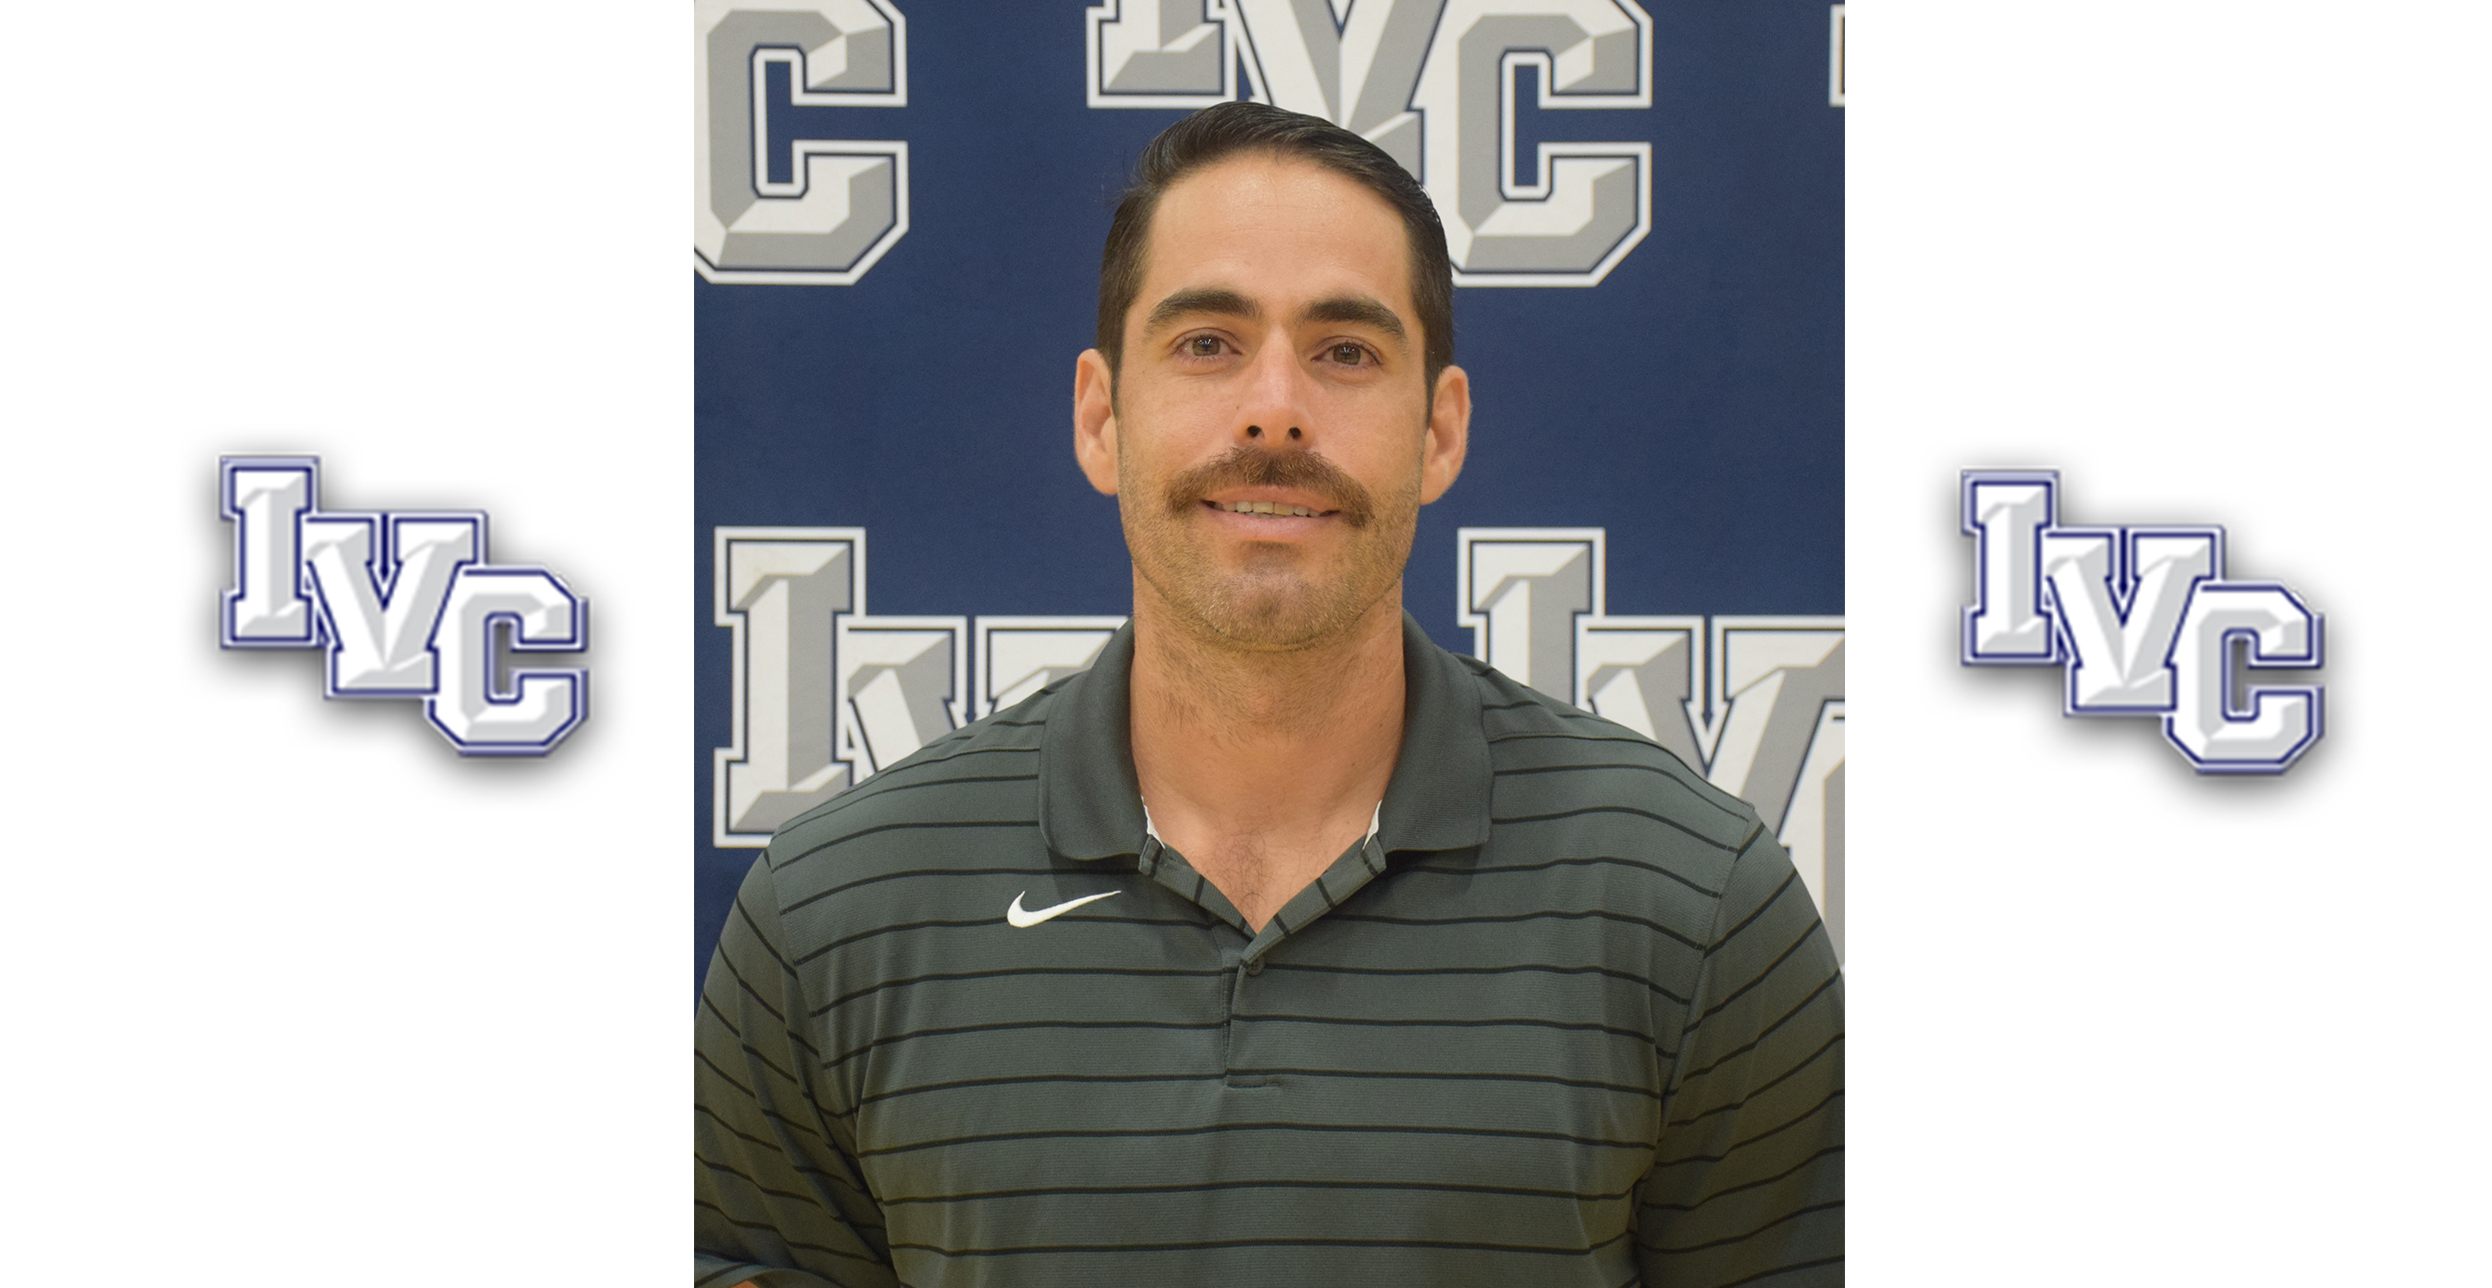 Former IVC star Rory Jones is the new men's volleyball coach